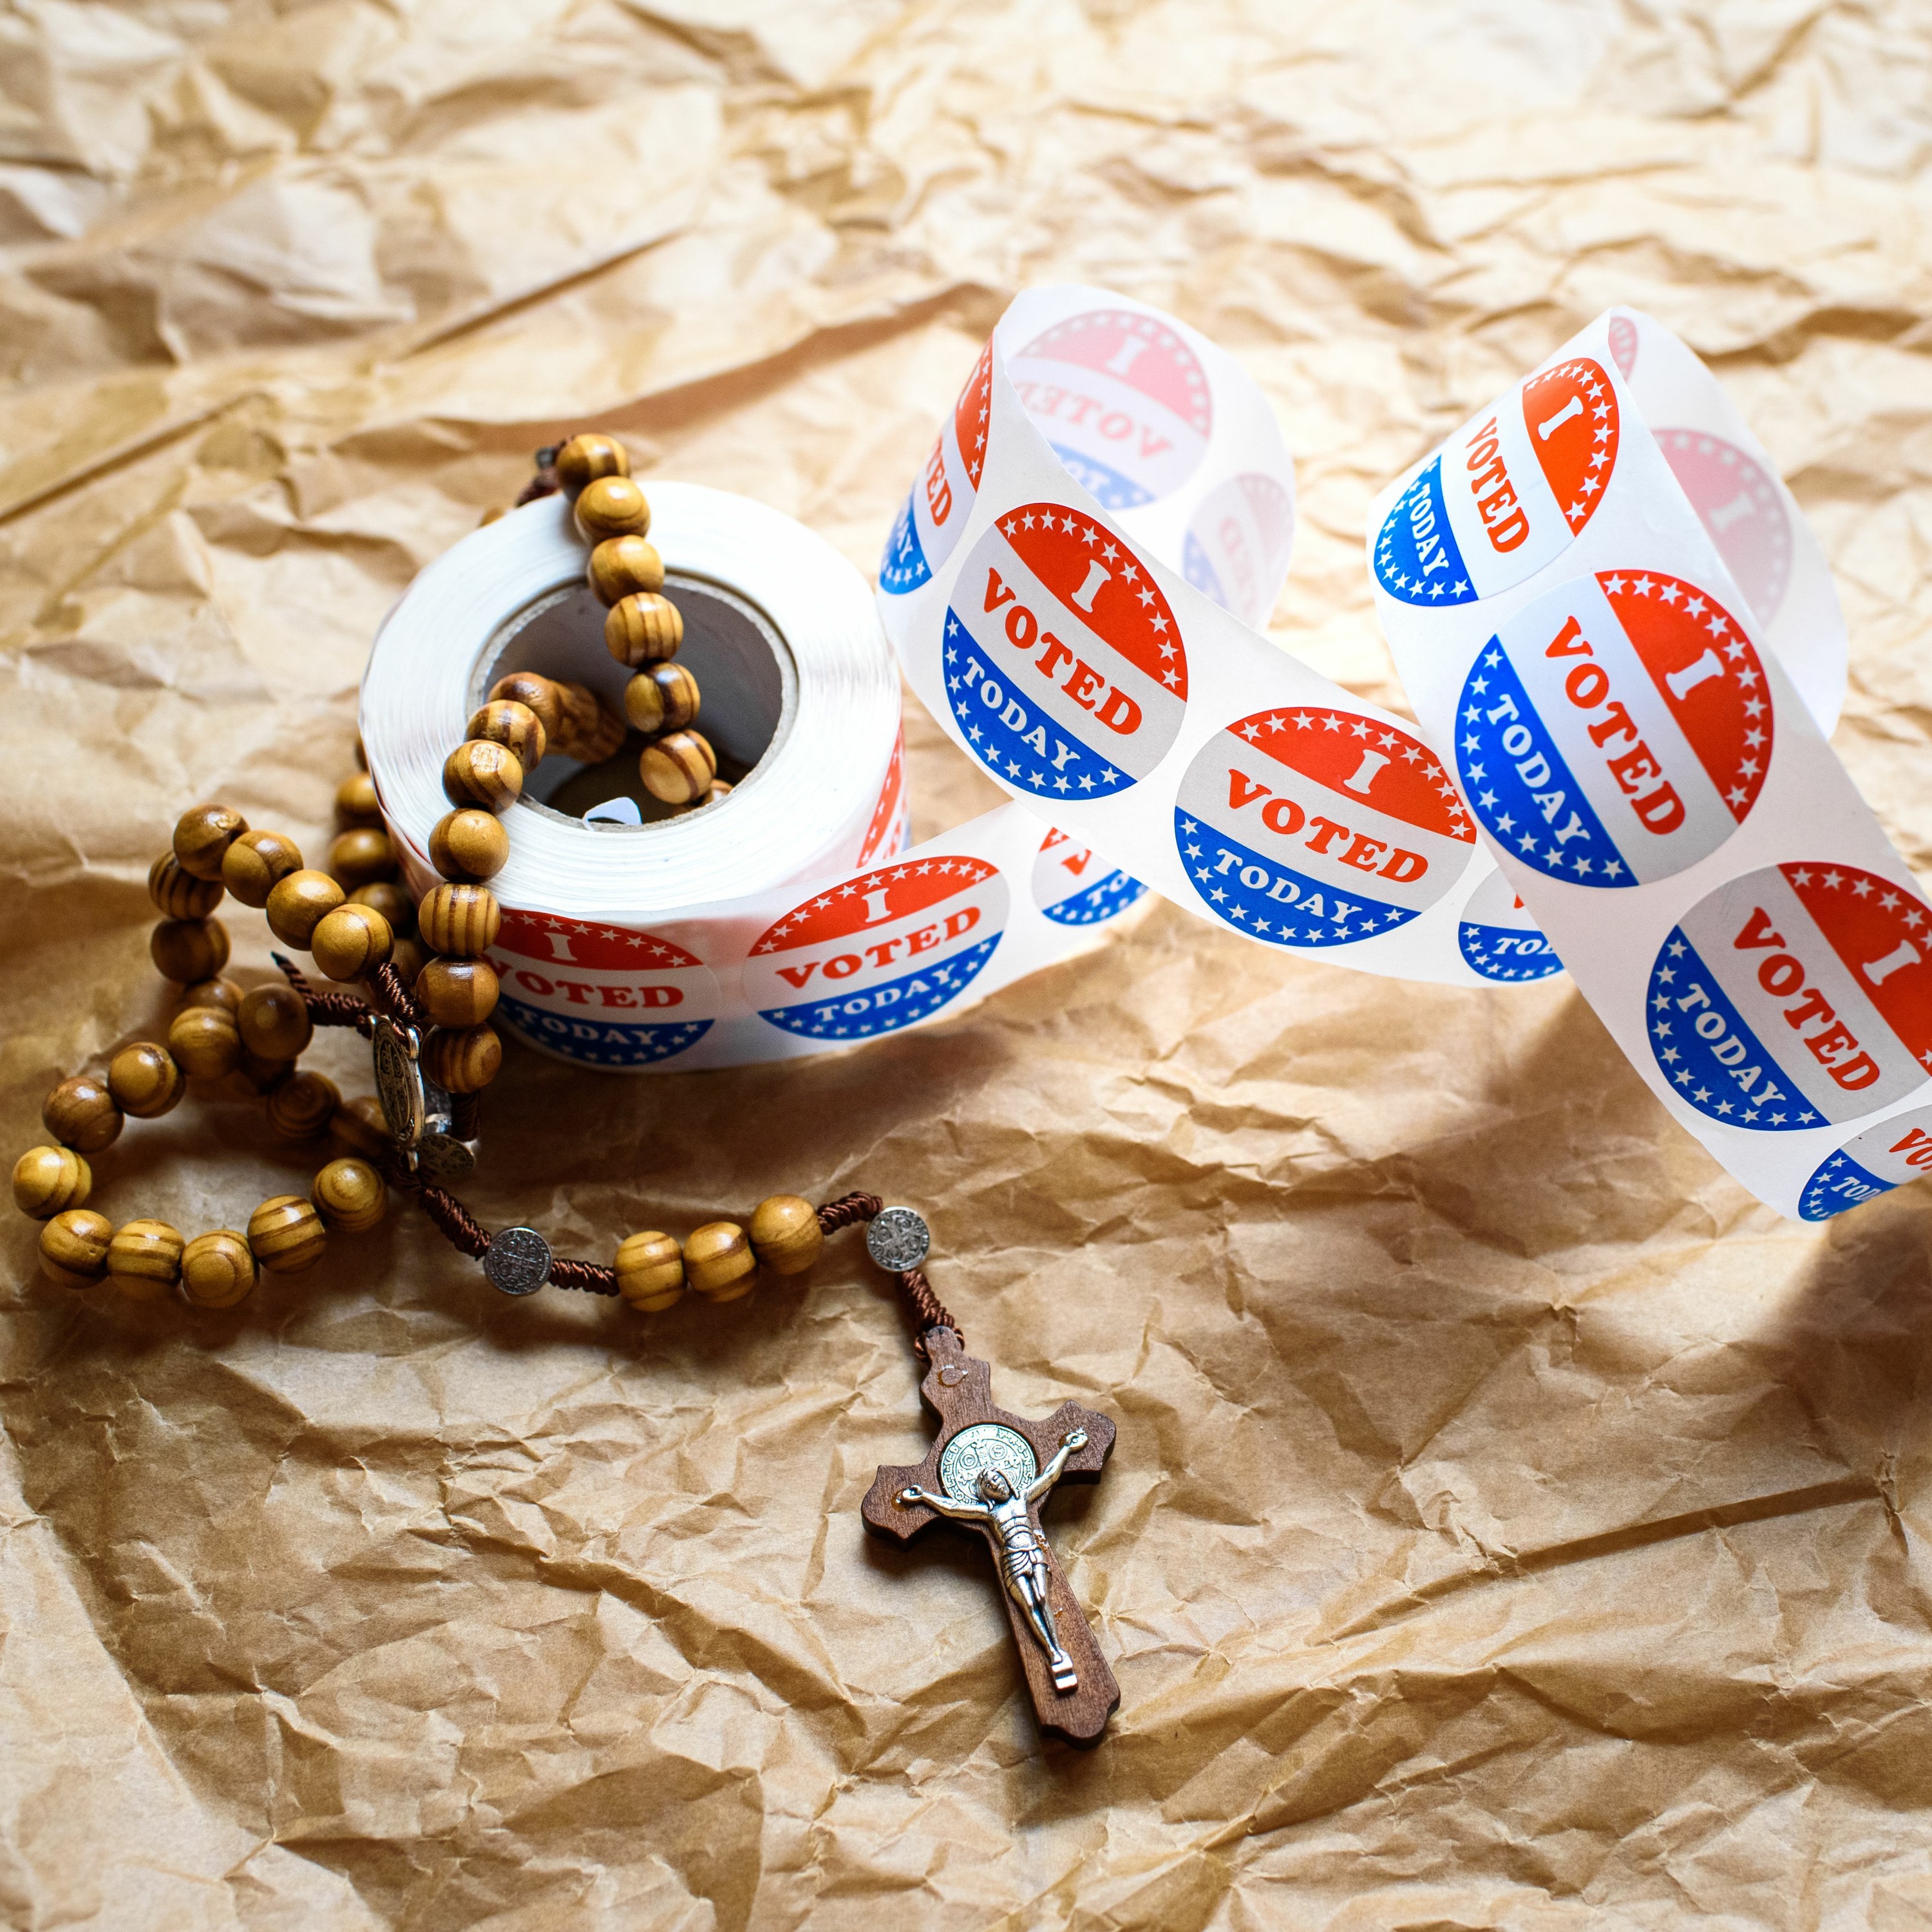 Is there a Catholic Vote? An Evangelical Vote? Religion, Polls, and Presidential Elections